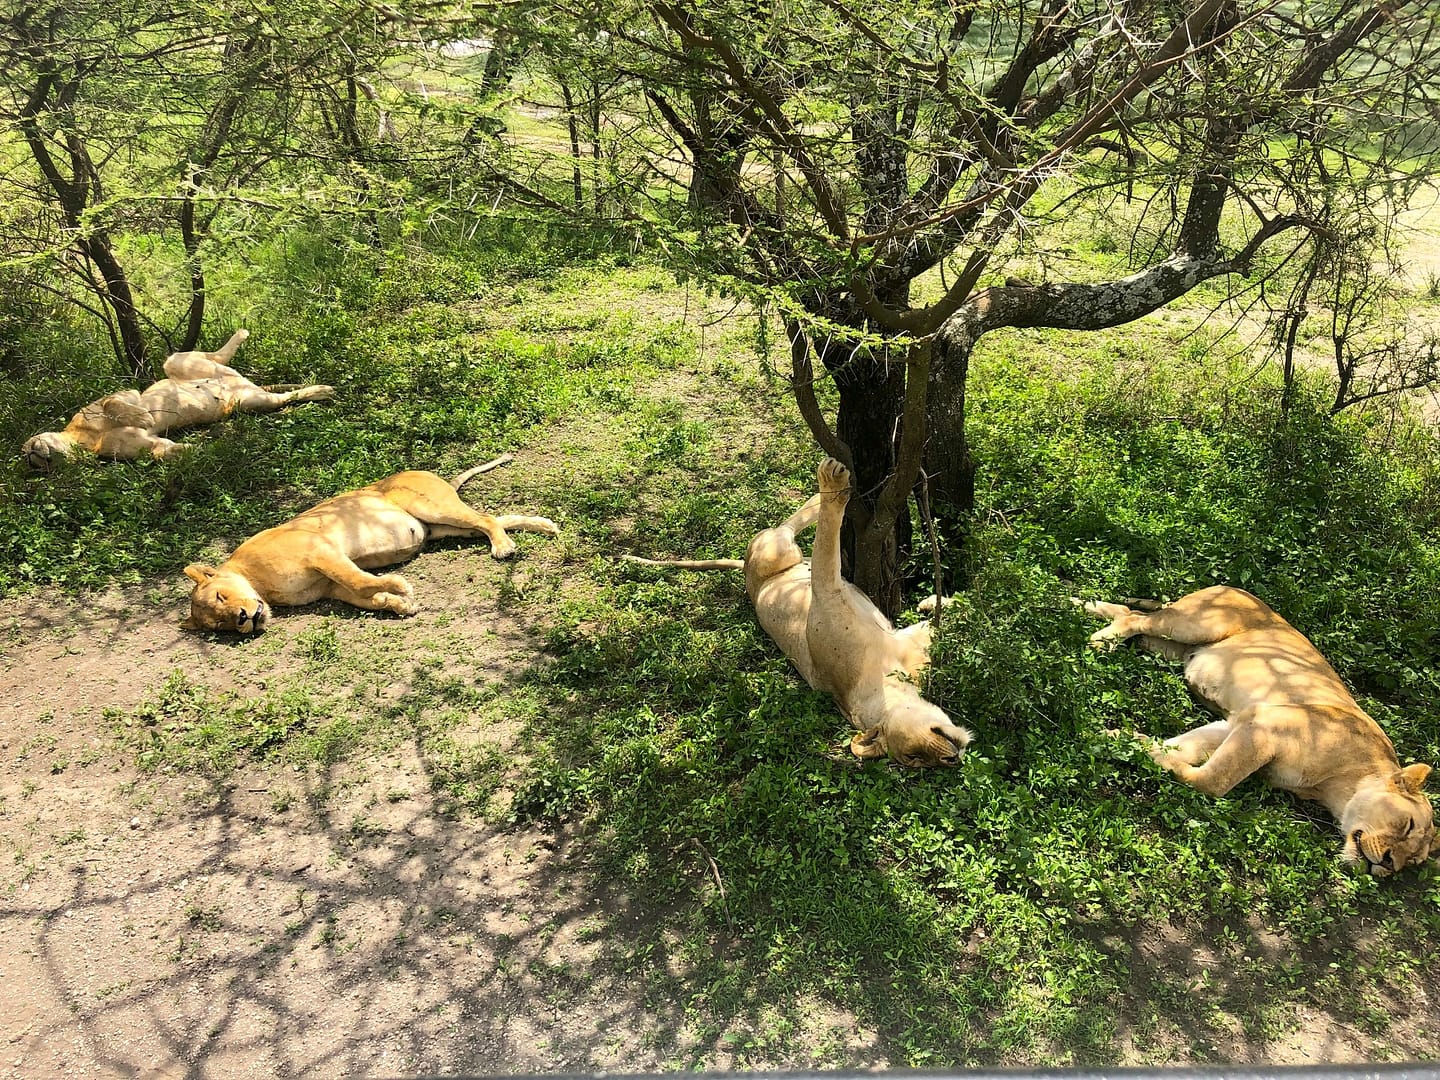 A pride of lions lounge in the Serengeti sun